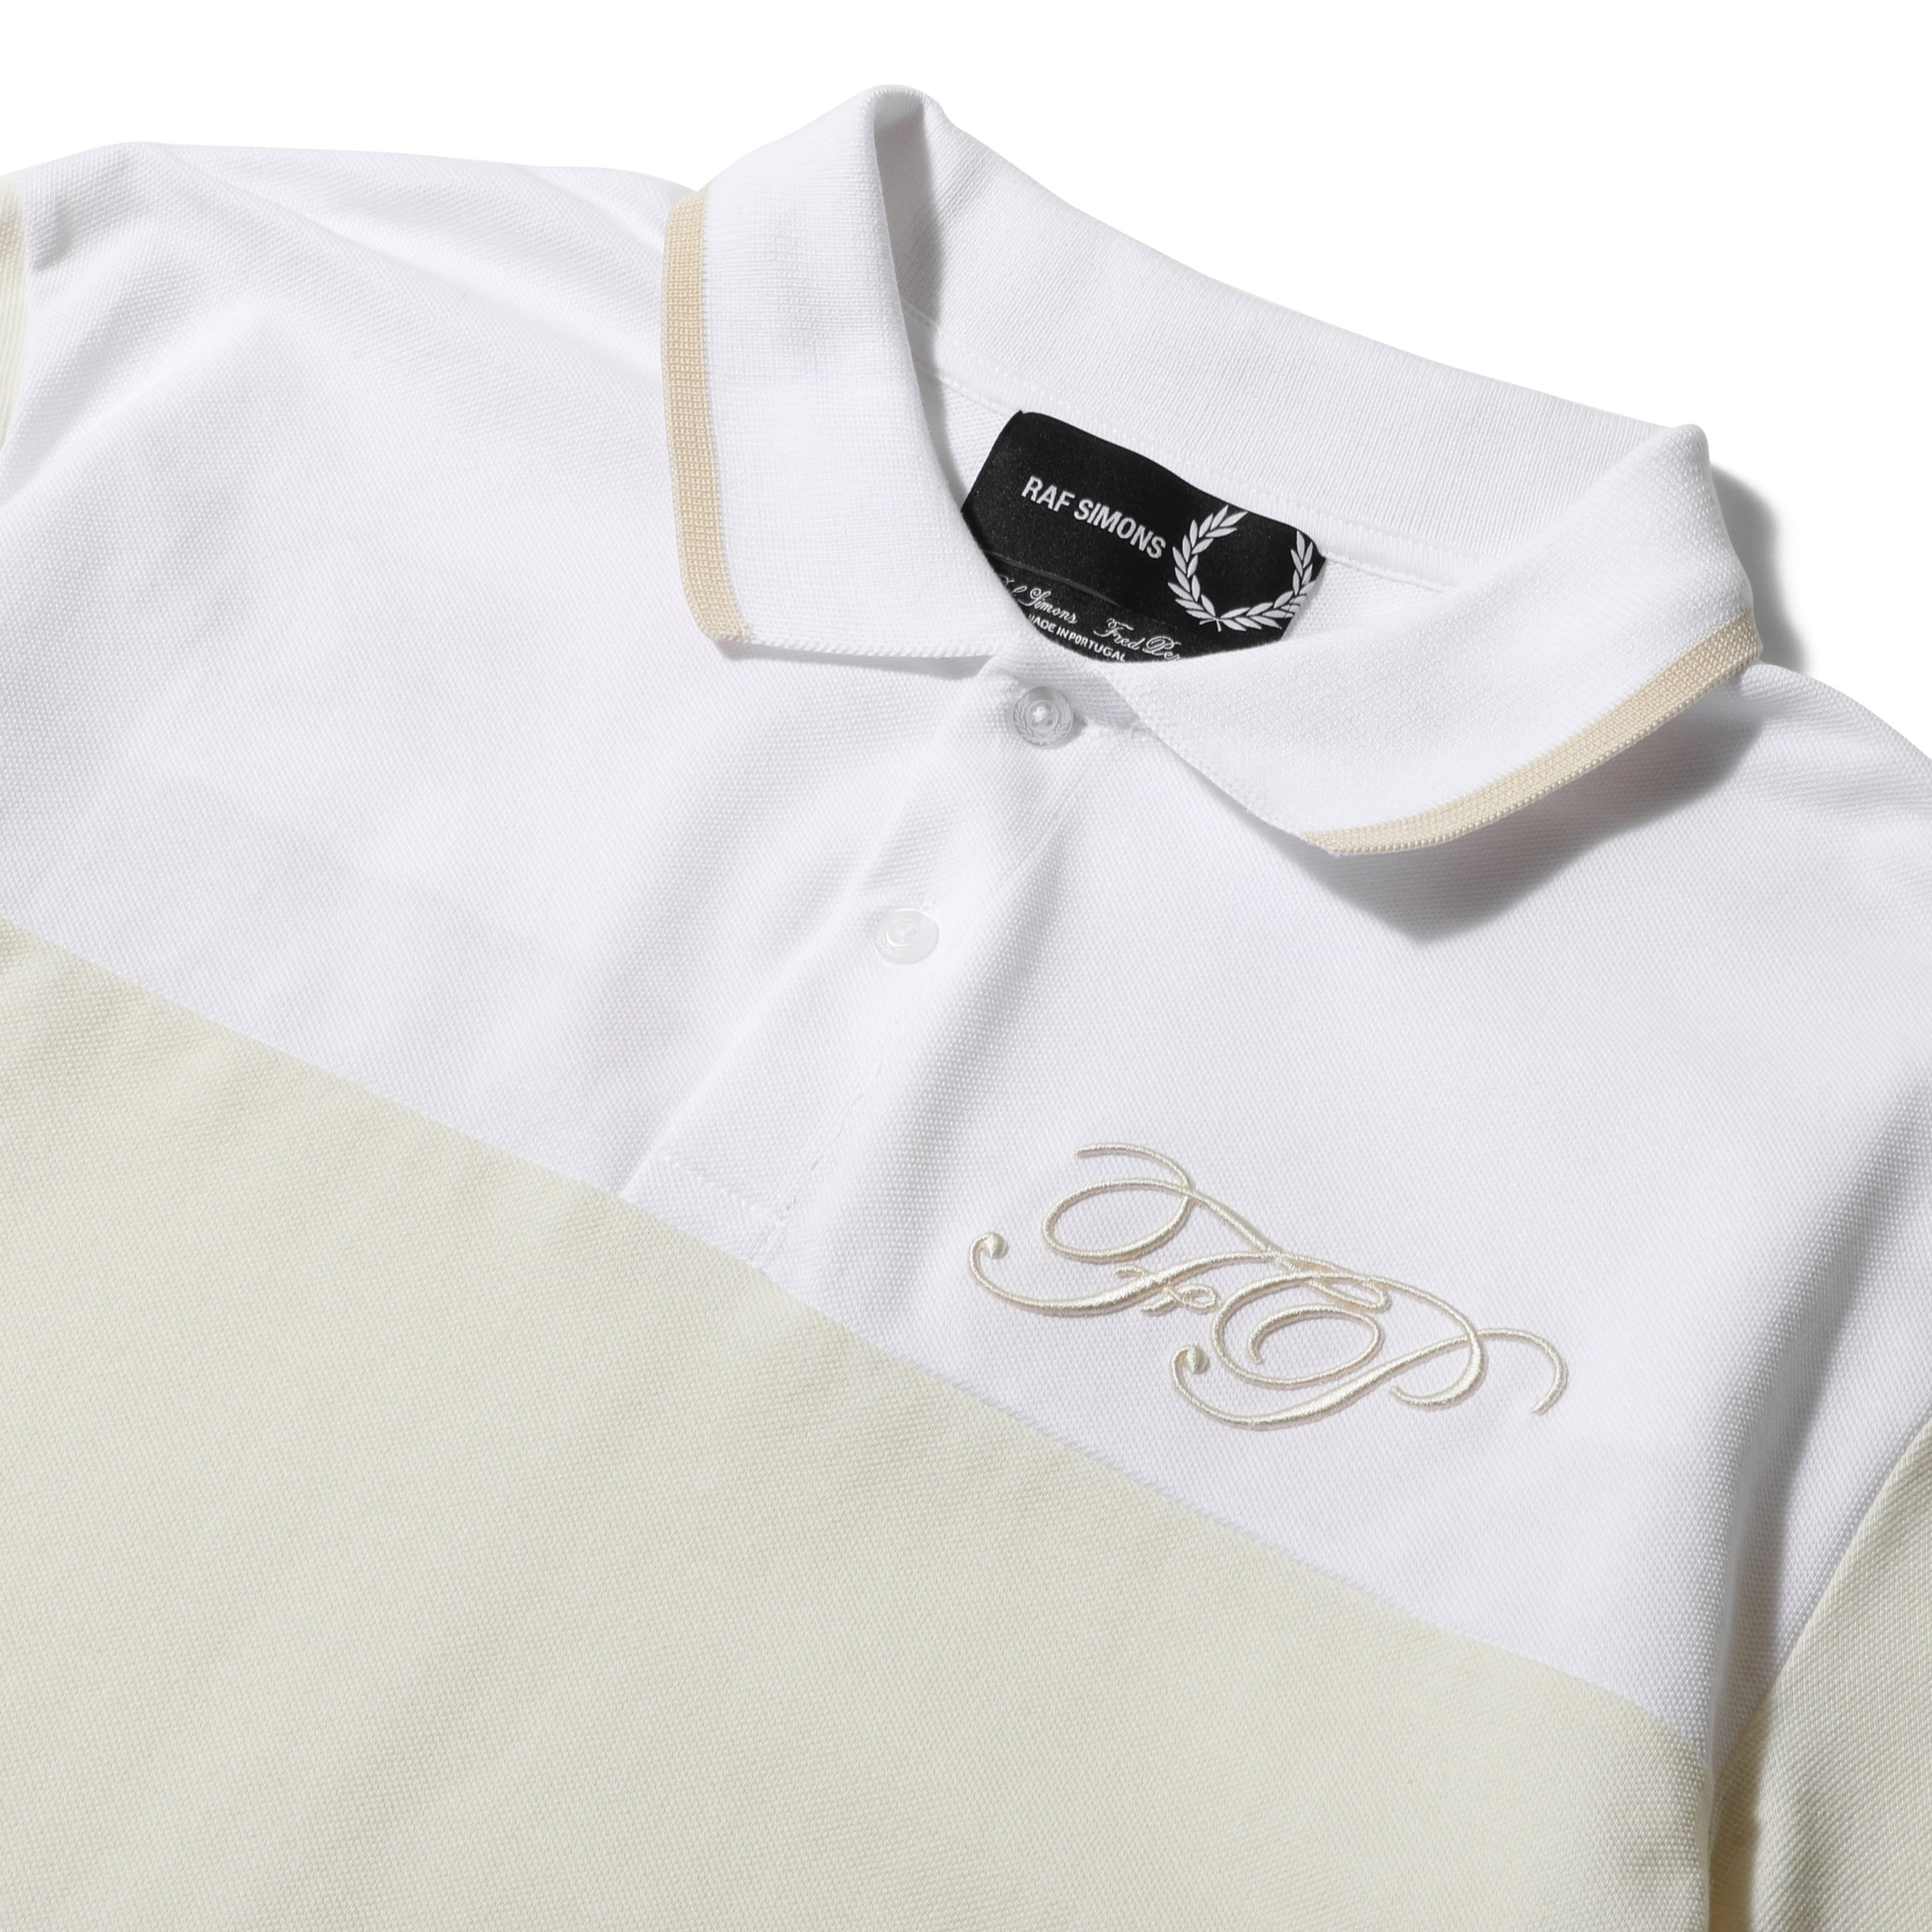 Fred Perry Shirts x Raf Simons EMBROIDERED INITIAL PIQUE SHRT